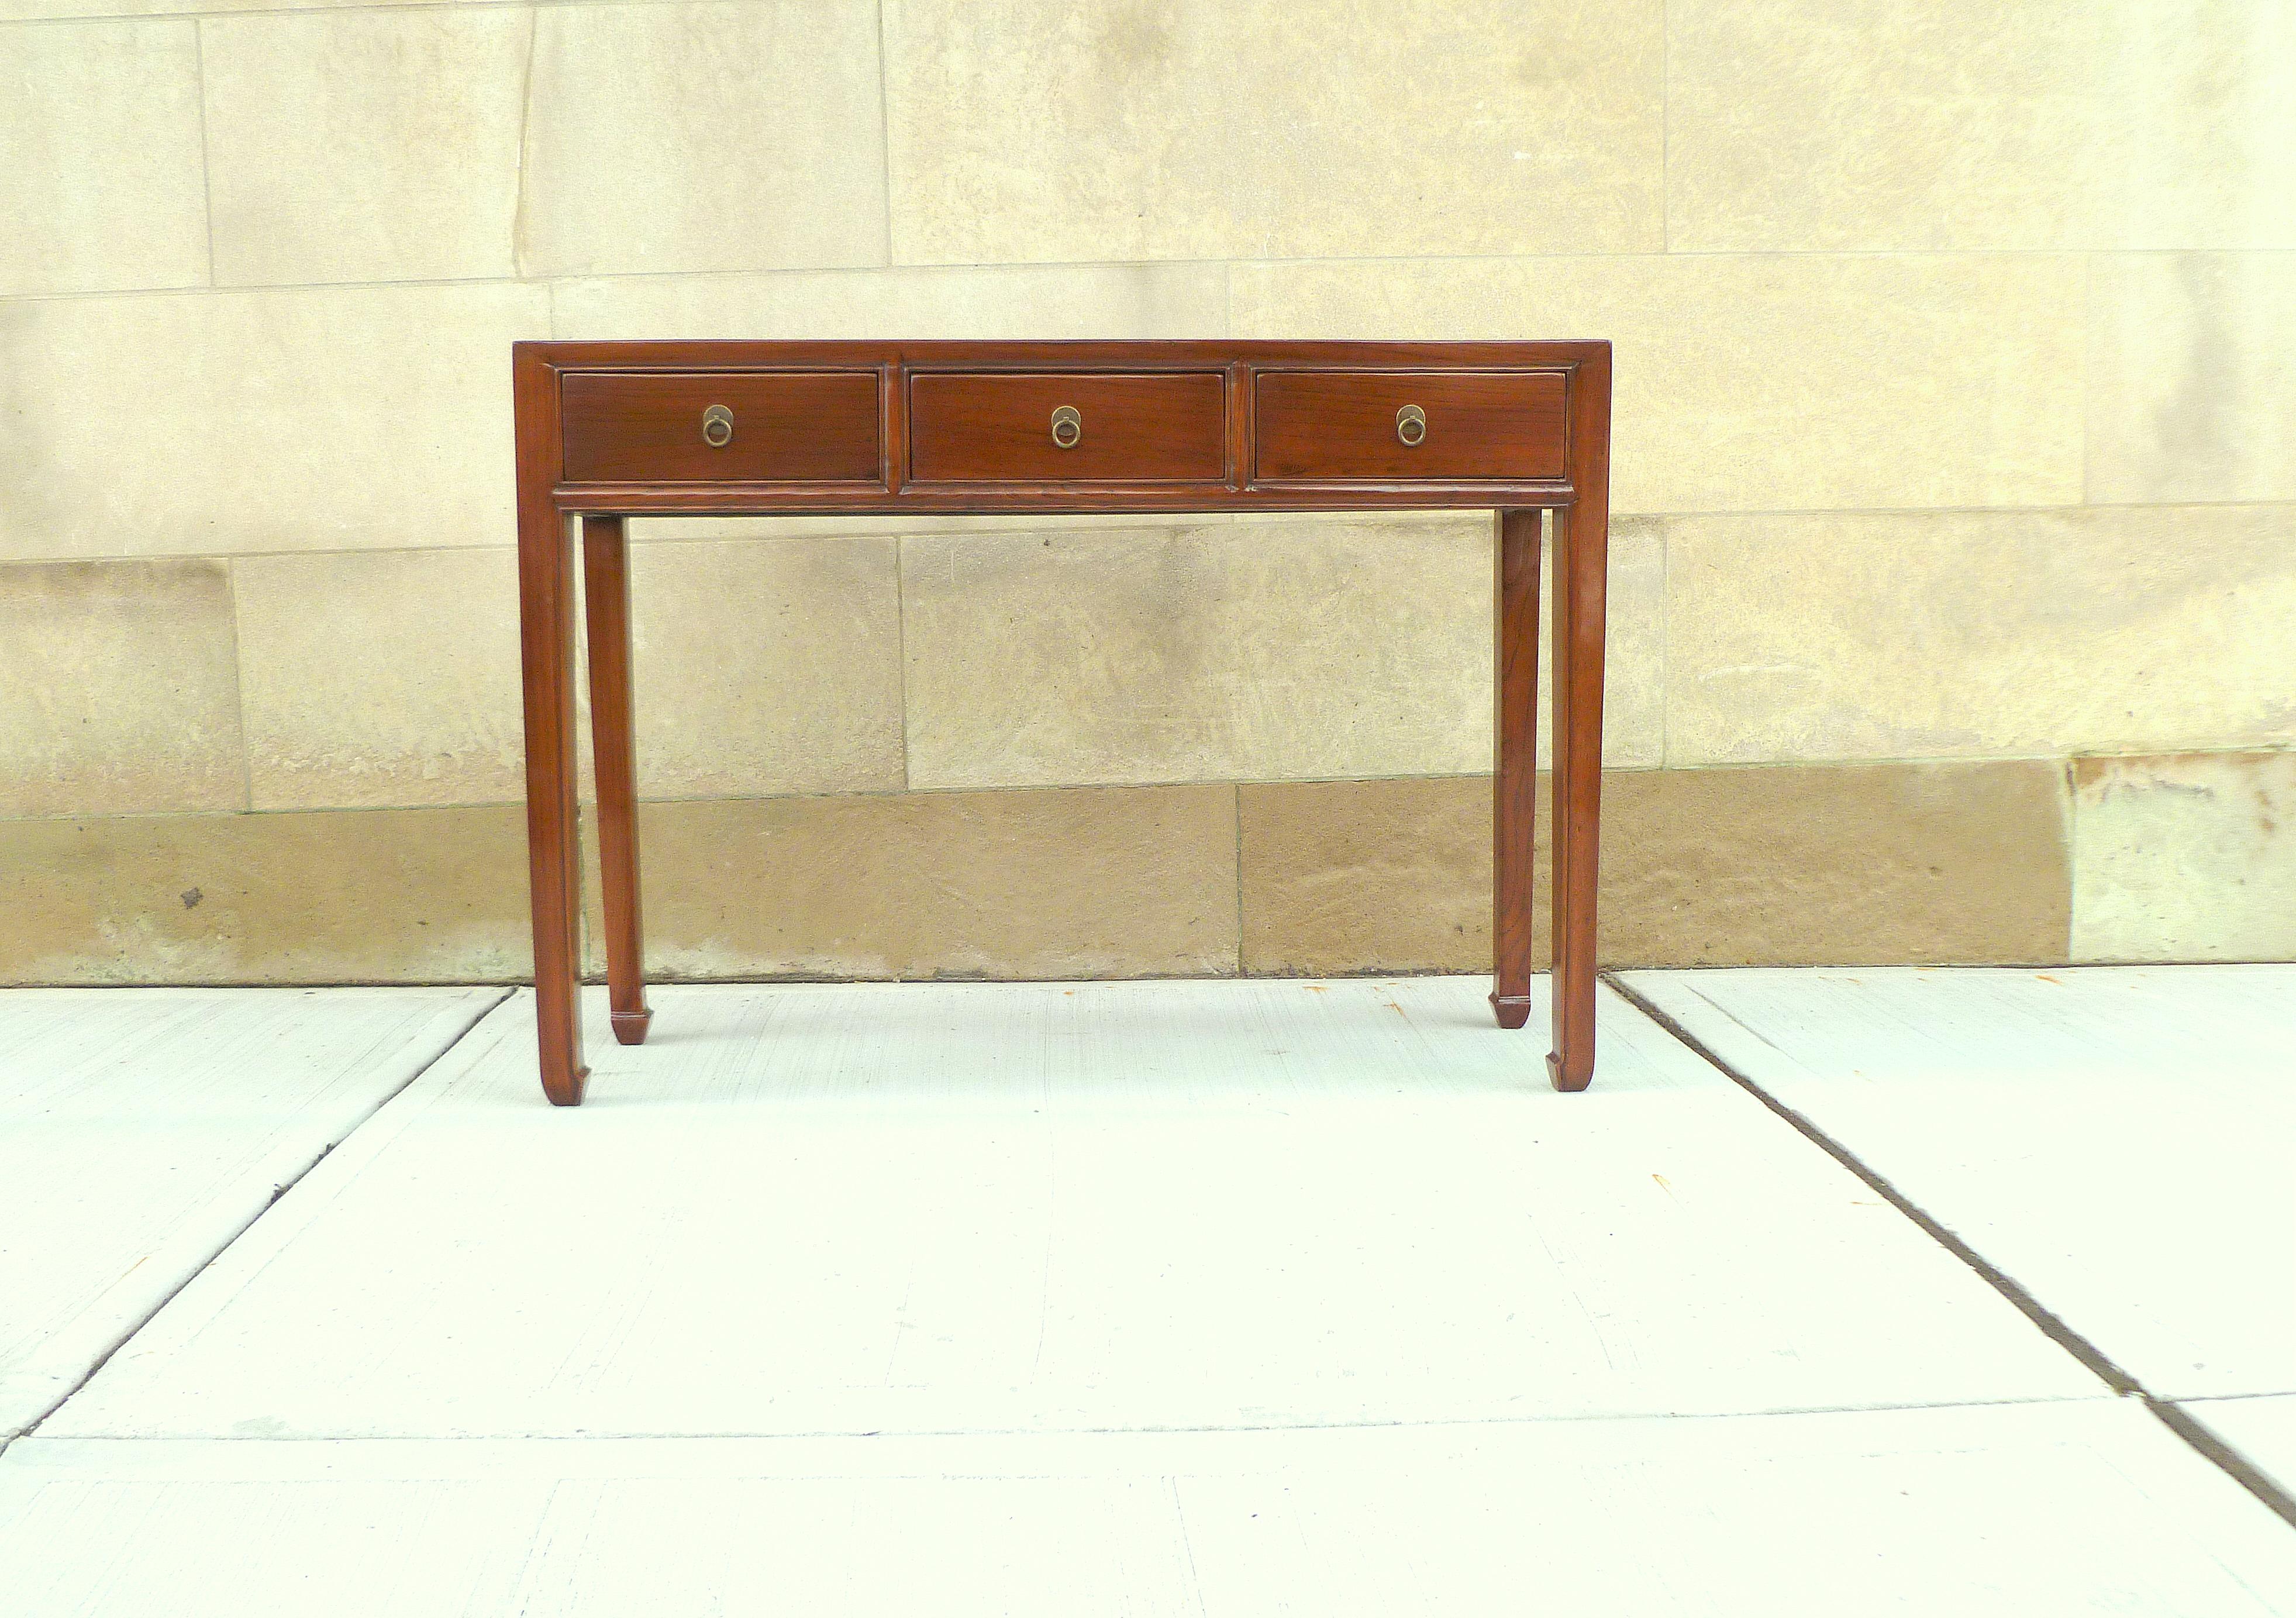 Fine jumu wood console table with four drawers. Simple and elegant console table, beautiful color. We carry fine quality furniture with elegant finished and has been appeared many times in 